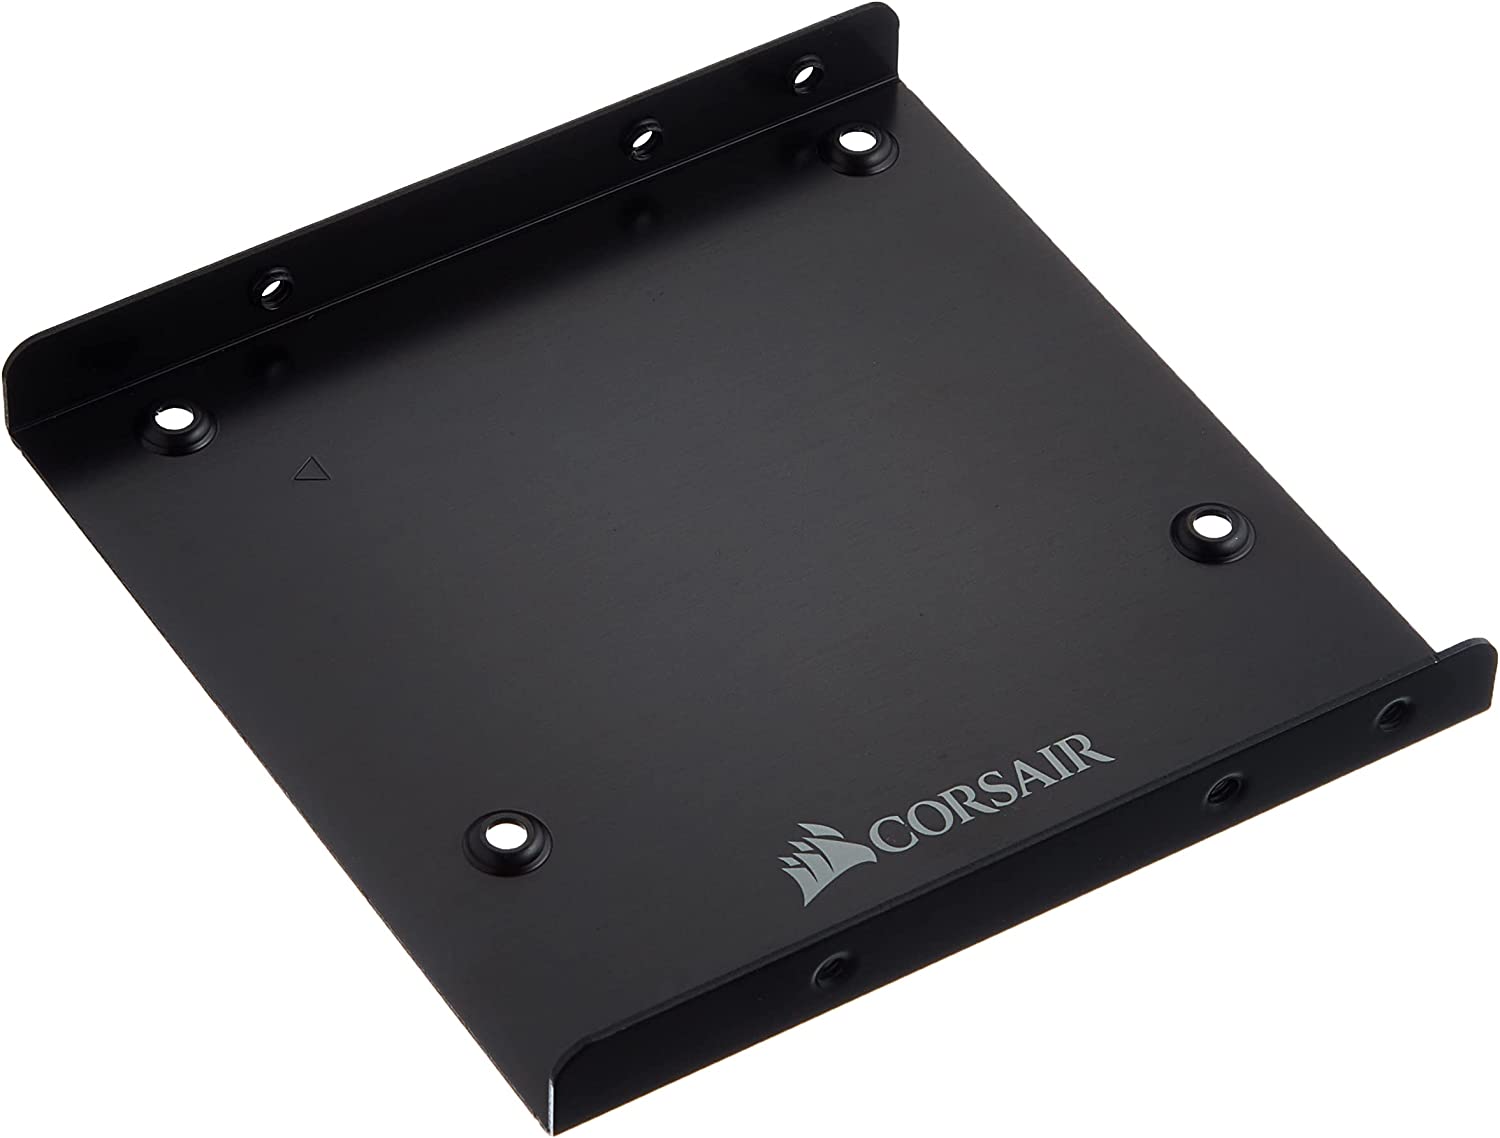 Corsair CSSD-BRKT1 Solid State Drive (SSD) Mounting Bracket Kit, Drive Bay, 2.5" to 3.5"